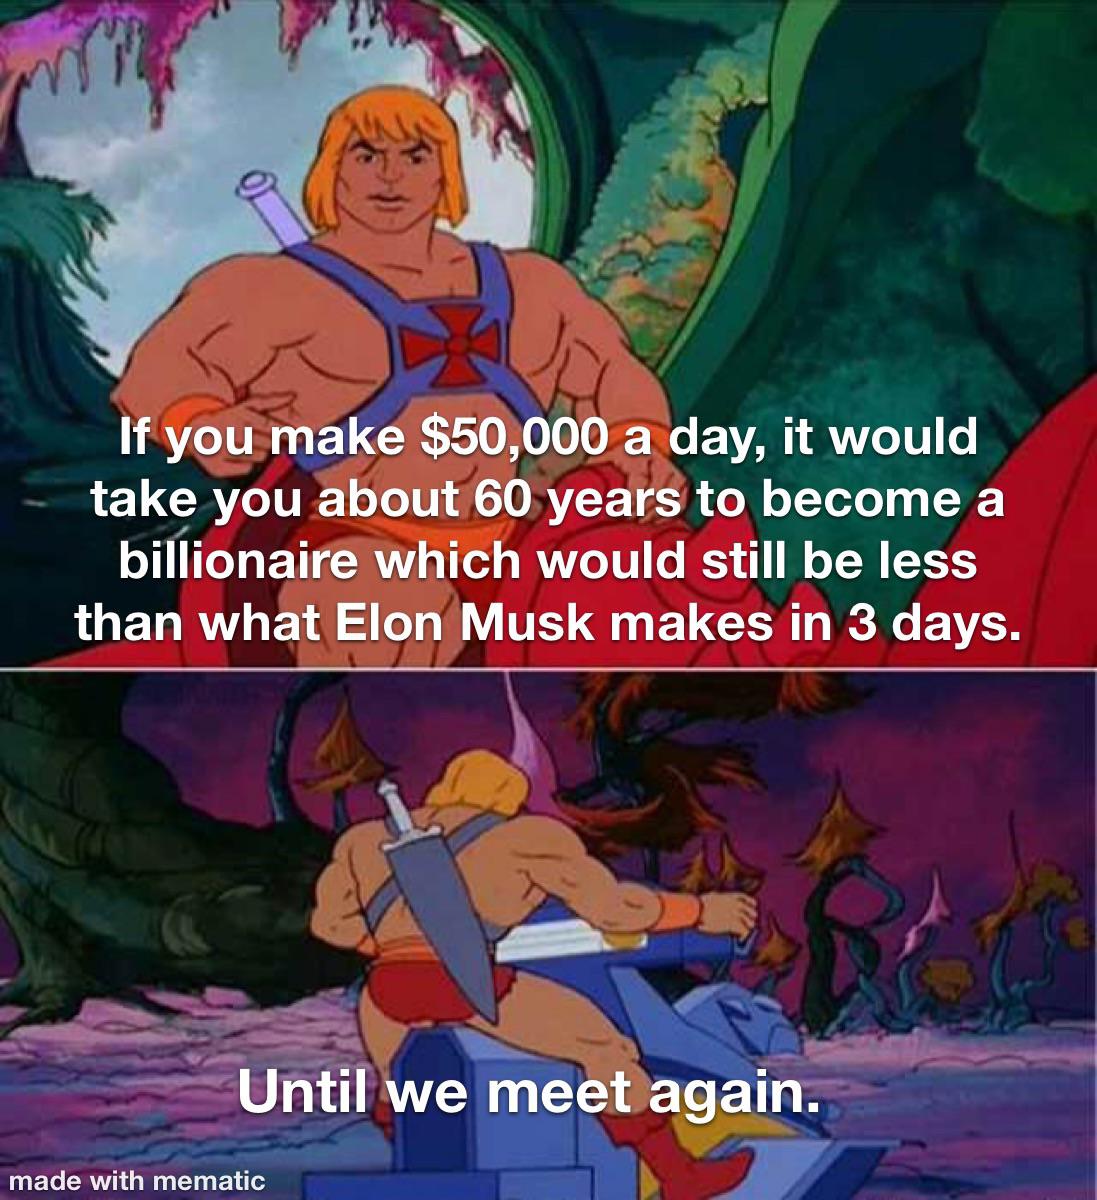 funny memes - he man meme template - If you make $50,000 a day, it would take you about 60 years to become a billionaire which would still be less than what Elon Musk makes in 3 days. Until we meet again. made with mematic